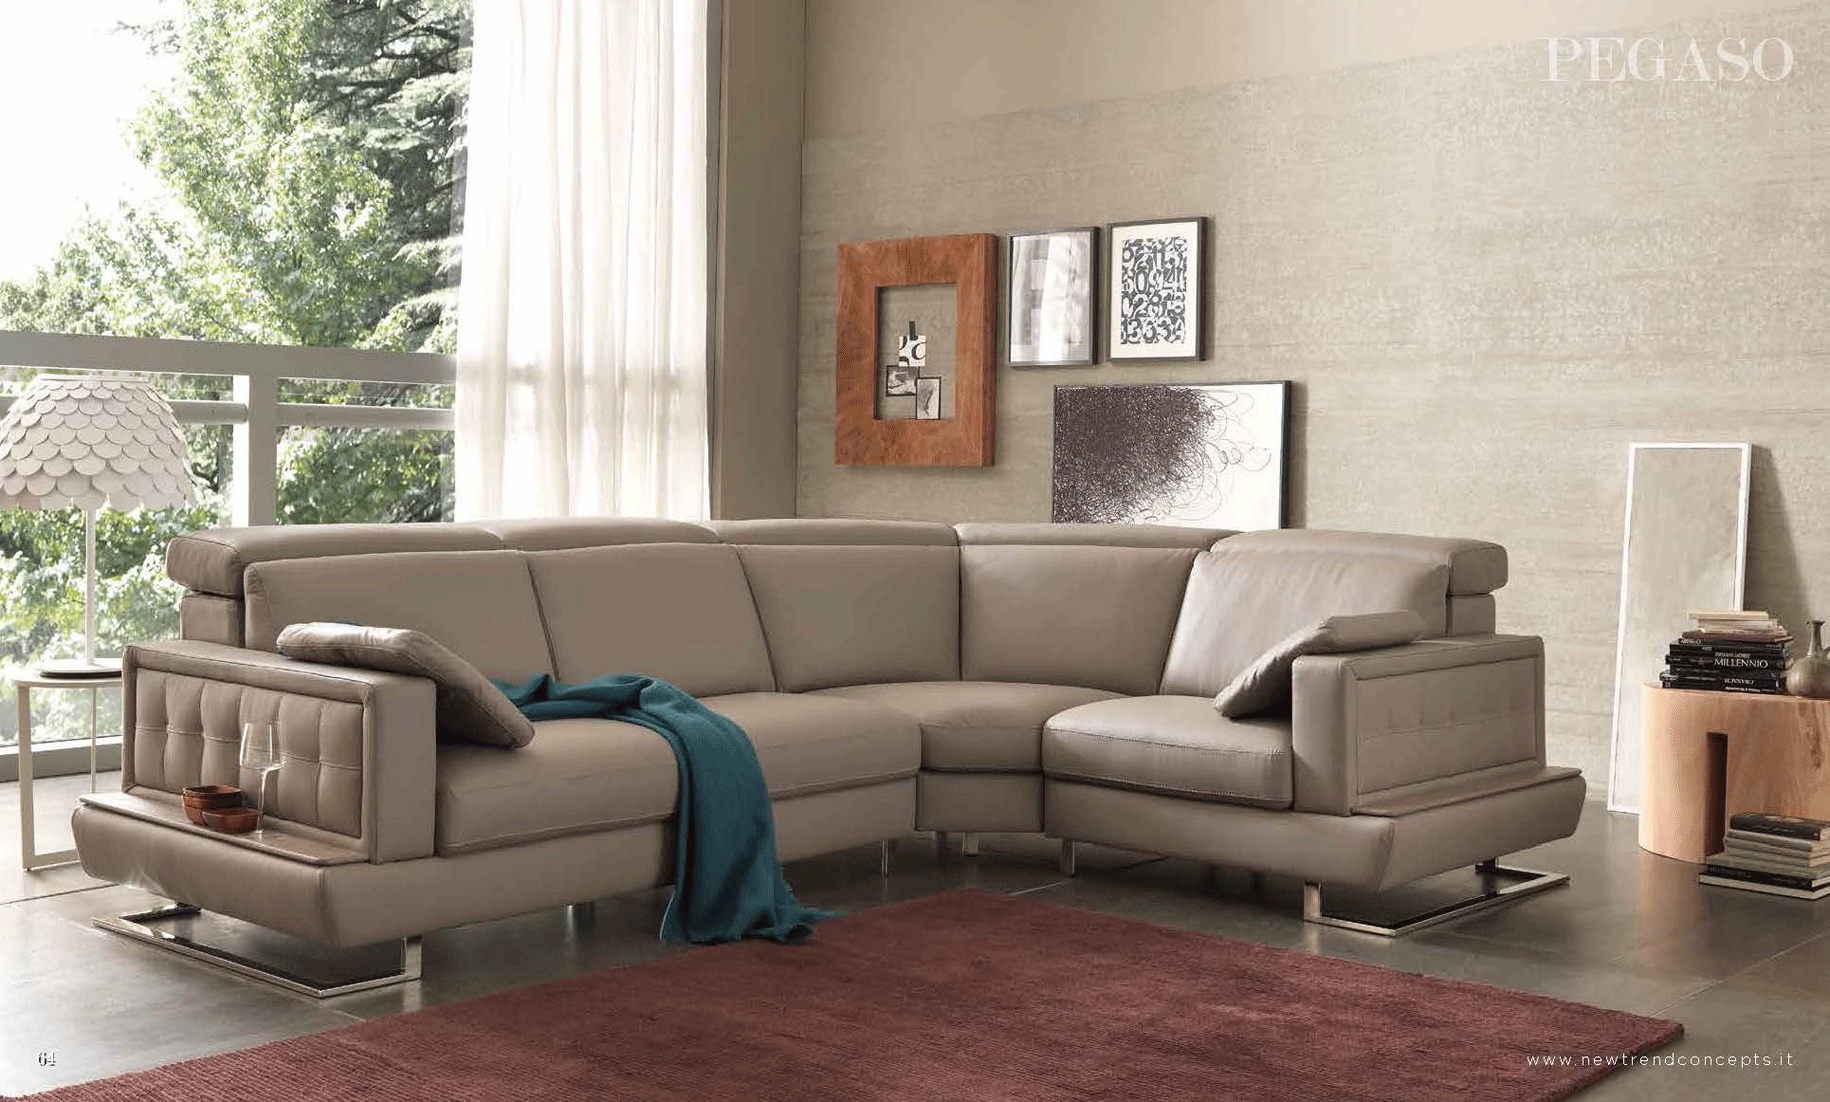 Living Room Furniture Sleepers Sofas Loveseats and Chairs Pegaso